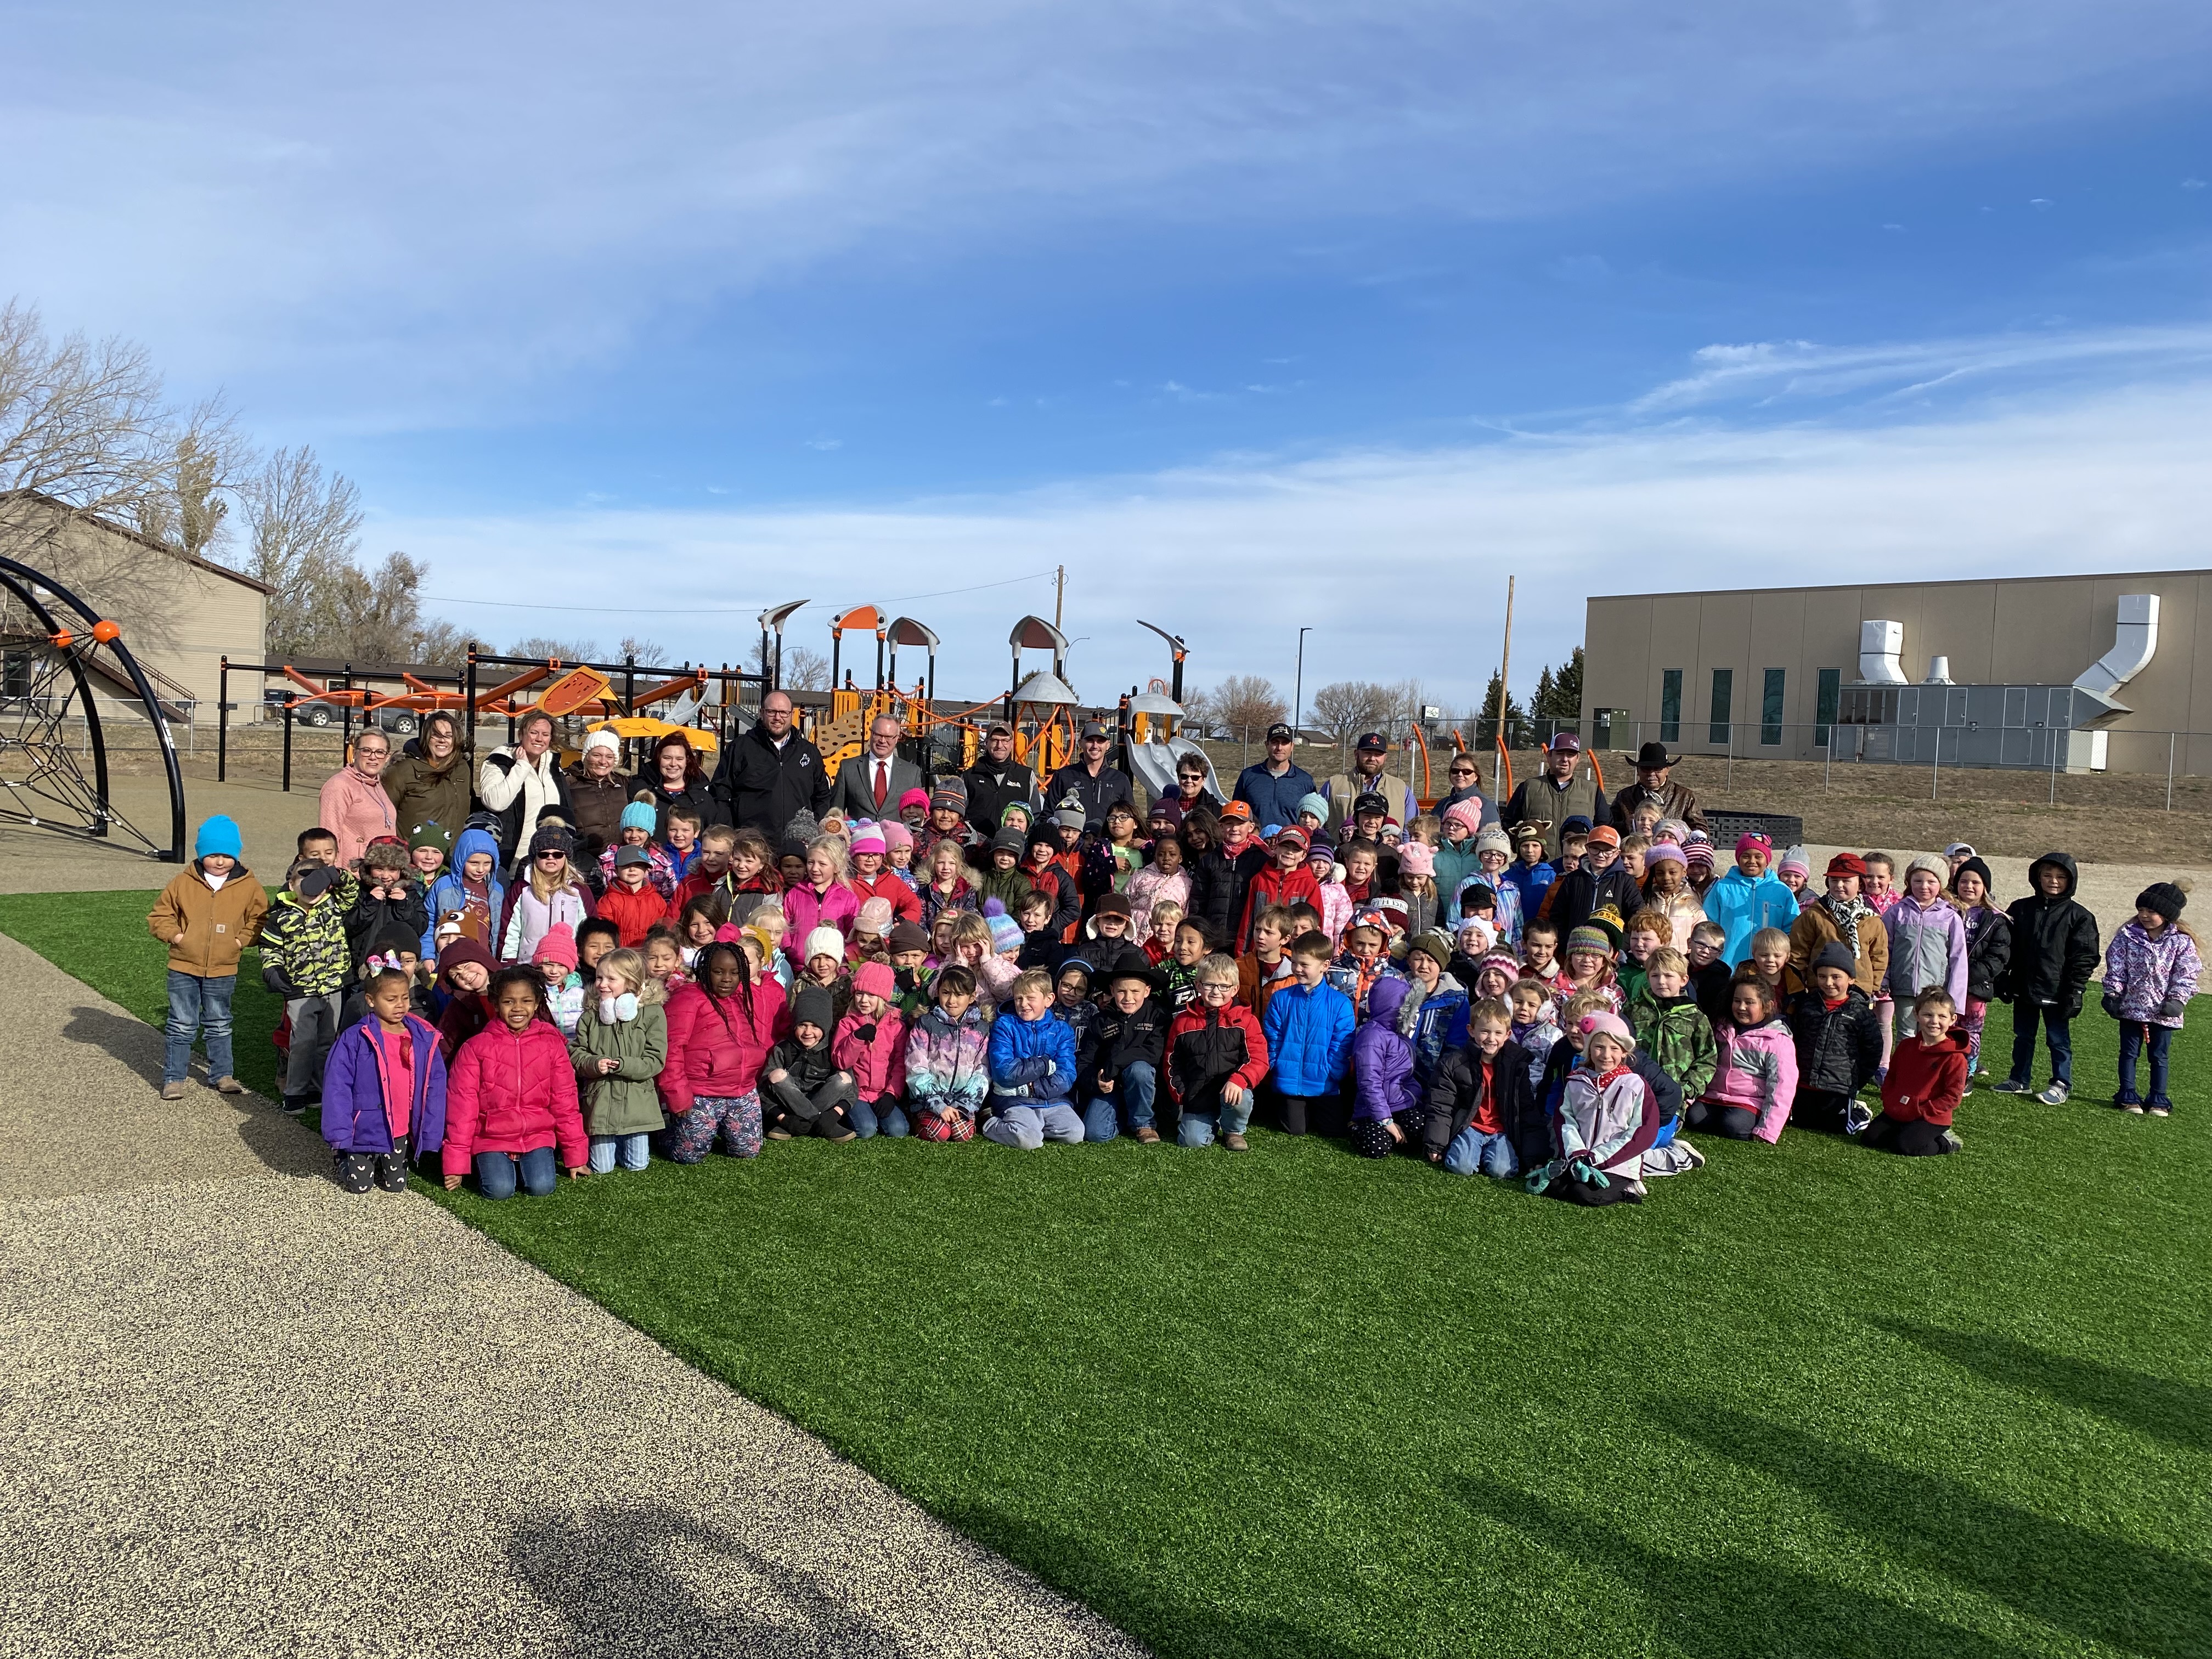 full group picture of students and adults on playground